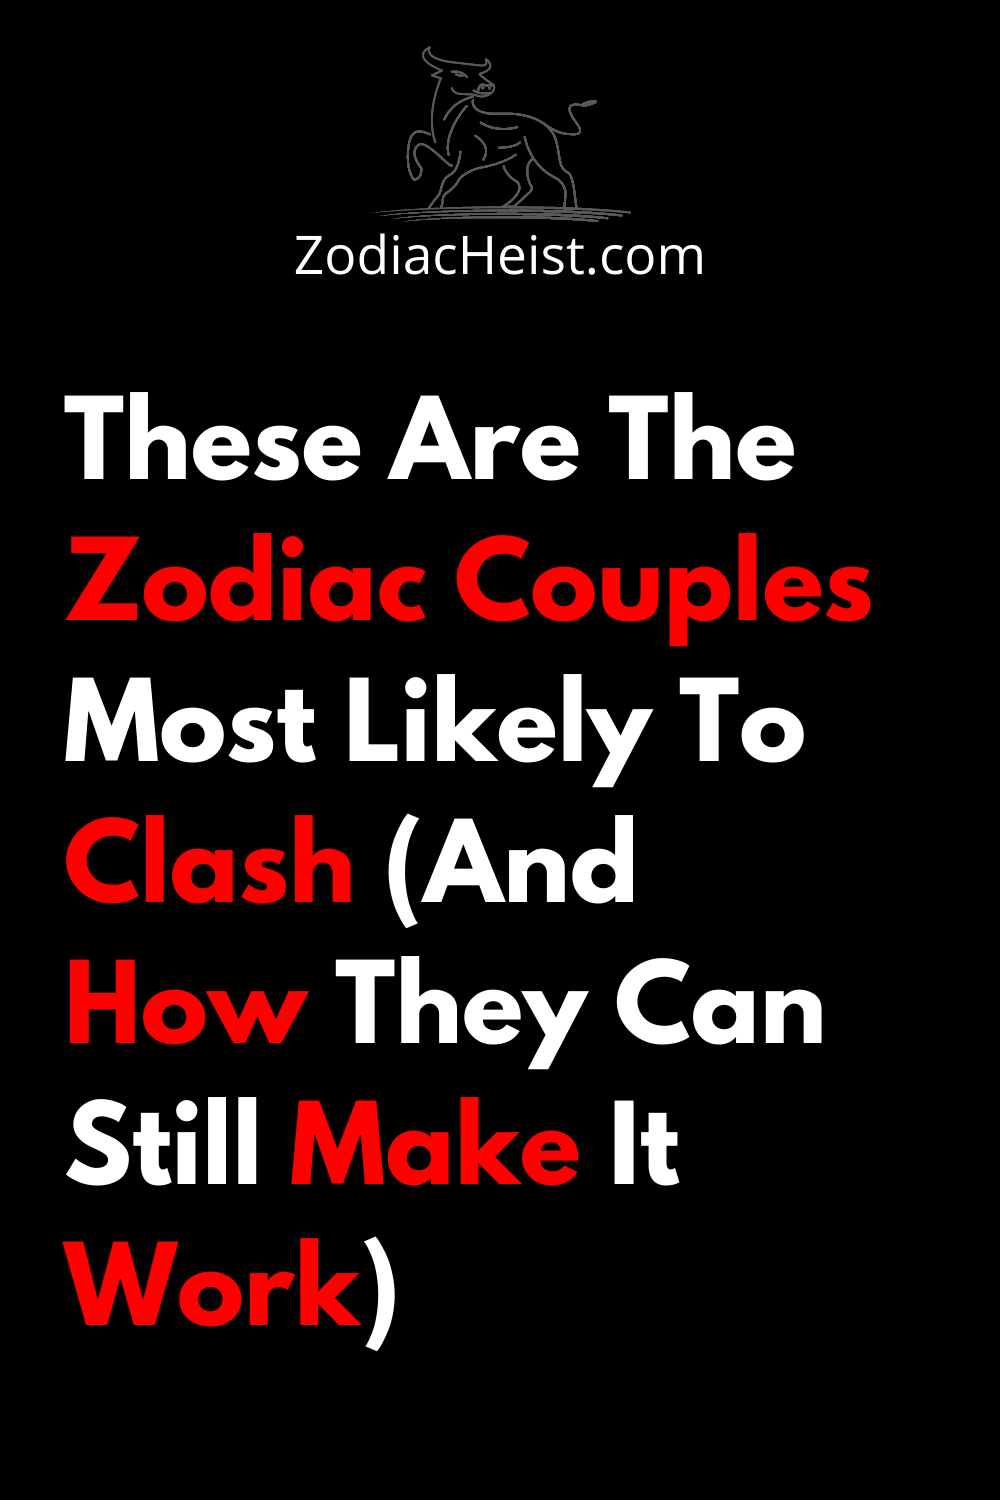 These Are The Zodiac Couples Most Likely To Clash (And How They Can Still Make It Work)